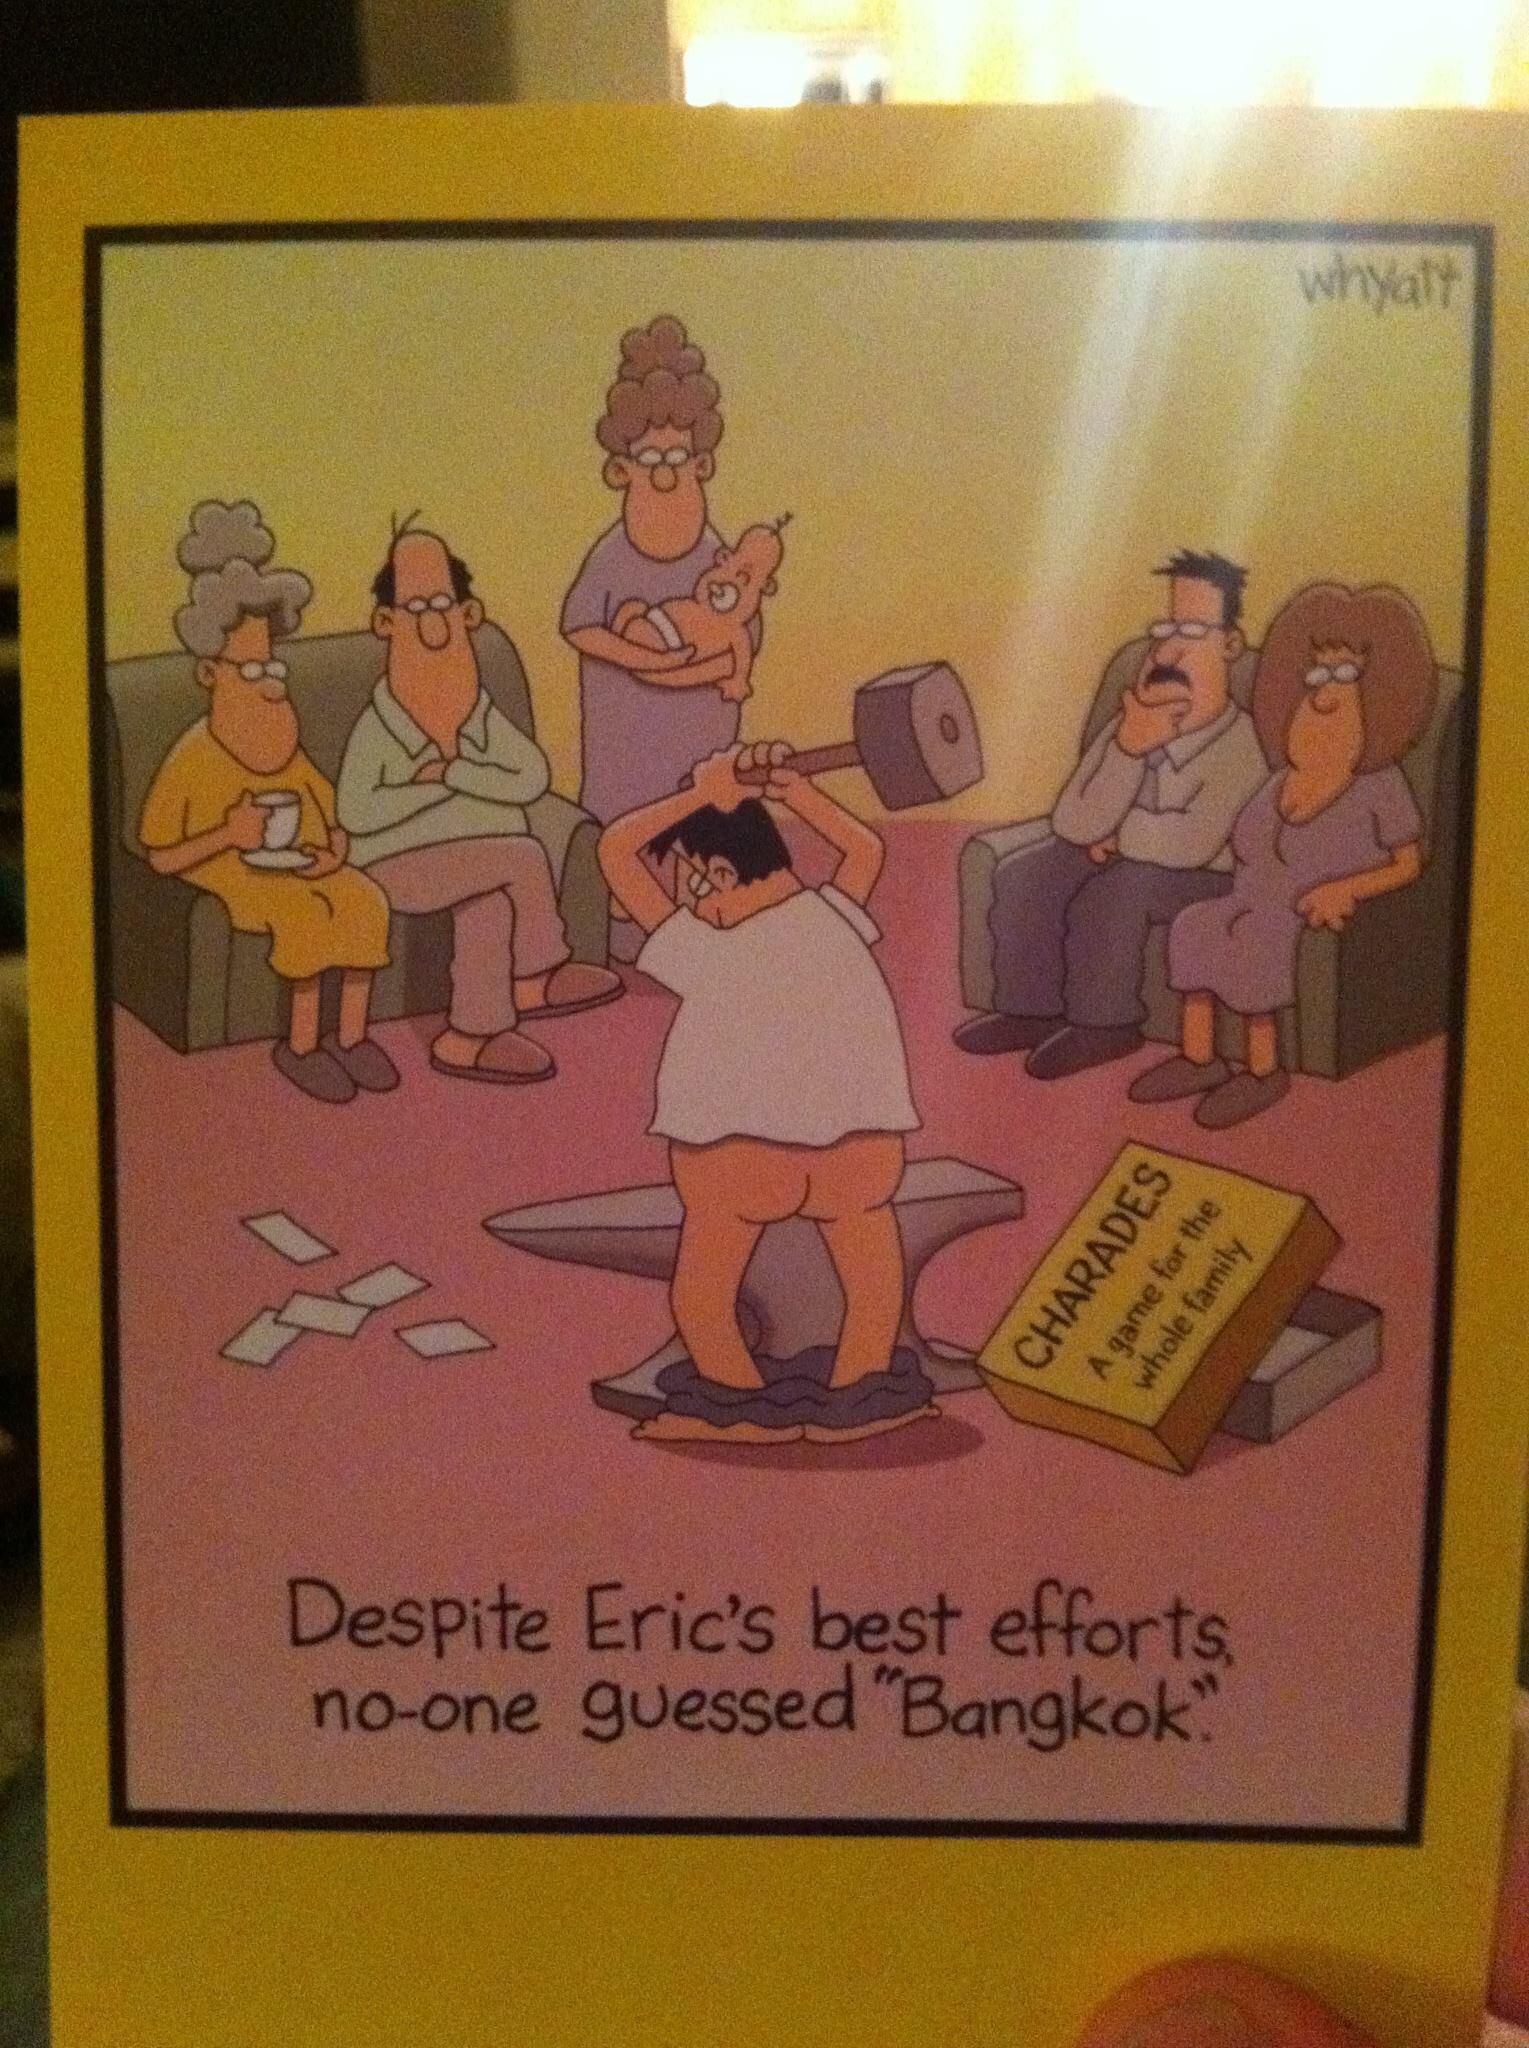 Got this today, possibly the funniest card I've ever seen.